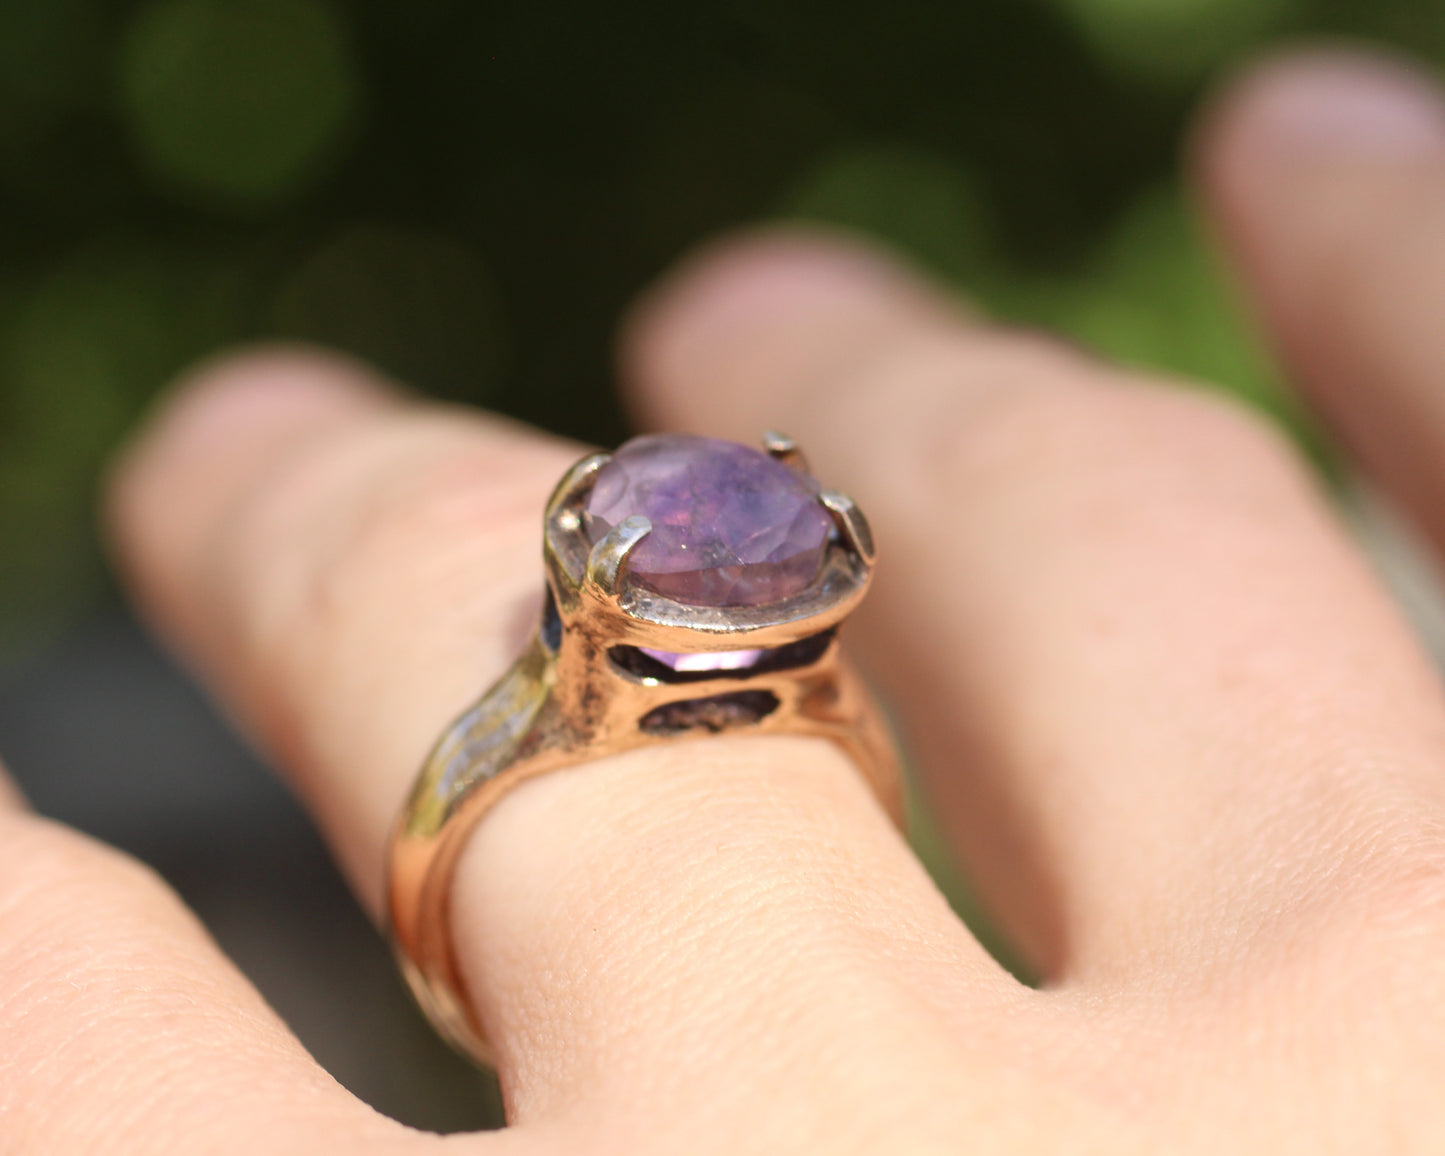 Hand faceted Amethyst ring - 6.25